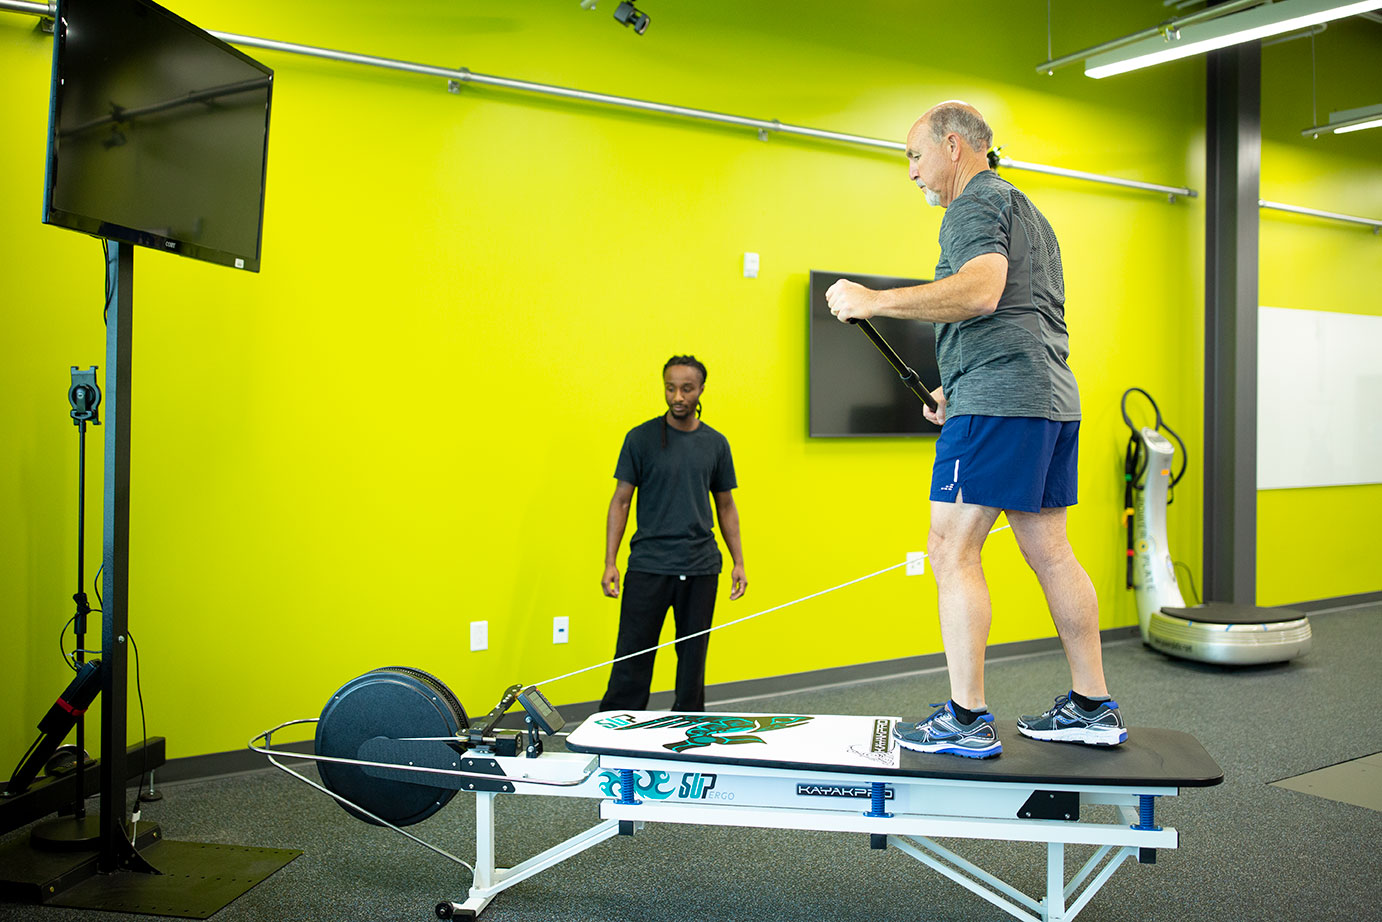 CLASP lecture on senior exercise includes visit to UHCL's new health institute